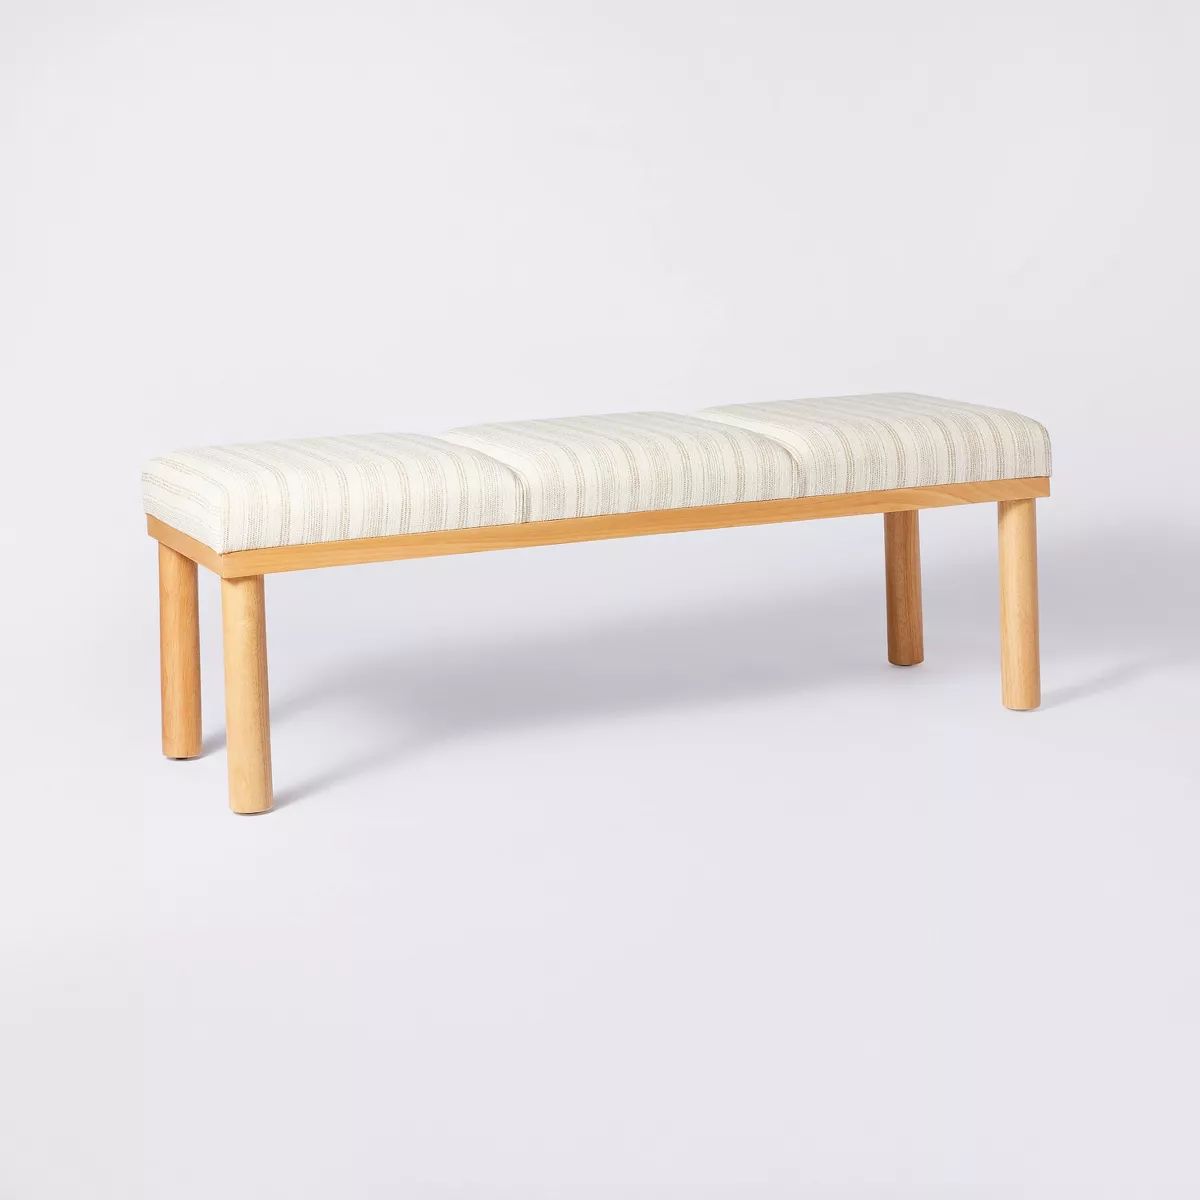 Scofield Channel Tufted Wood Leg Bench Neutral Stripe - Threshold™ designed with Studio McGee | Target